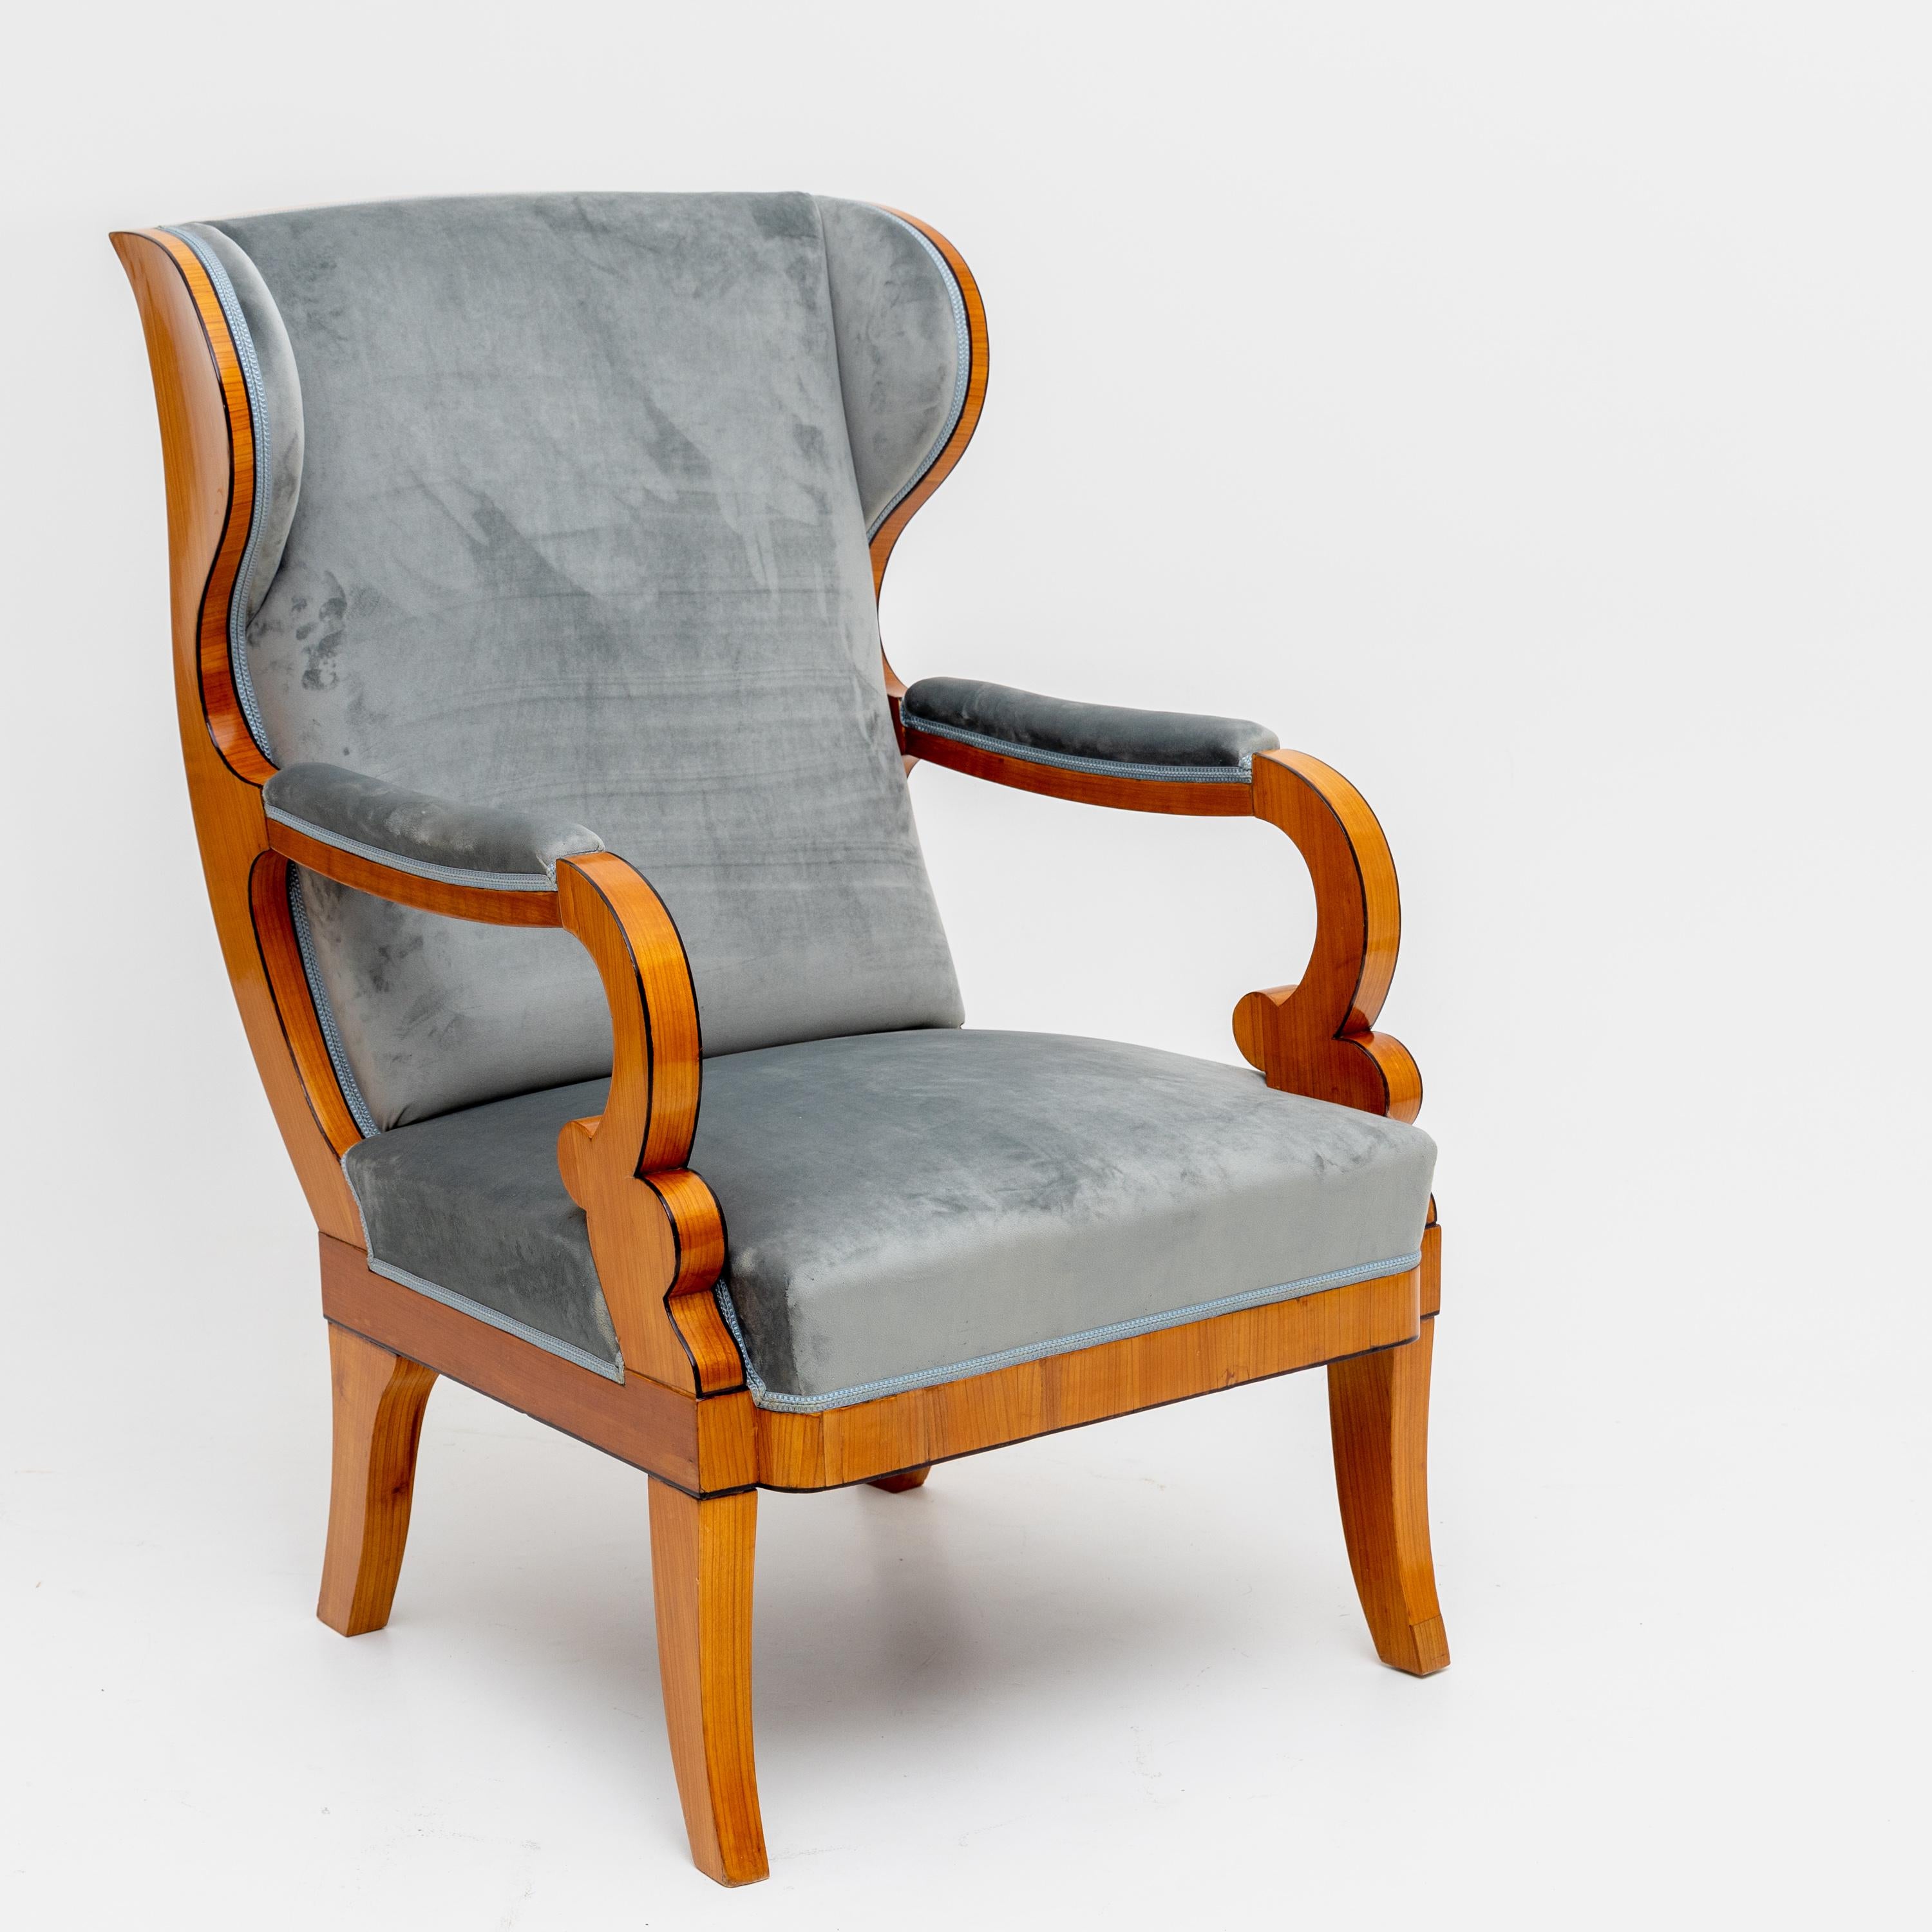 German Pair of Wingback Chairs, c. 1830